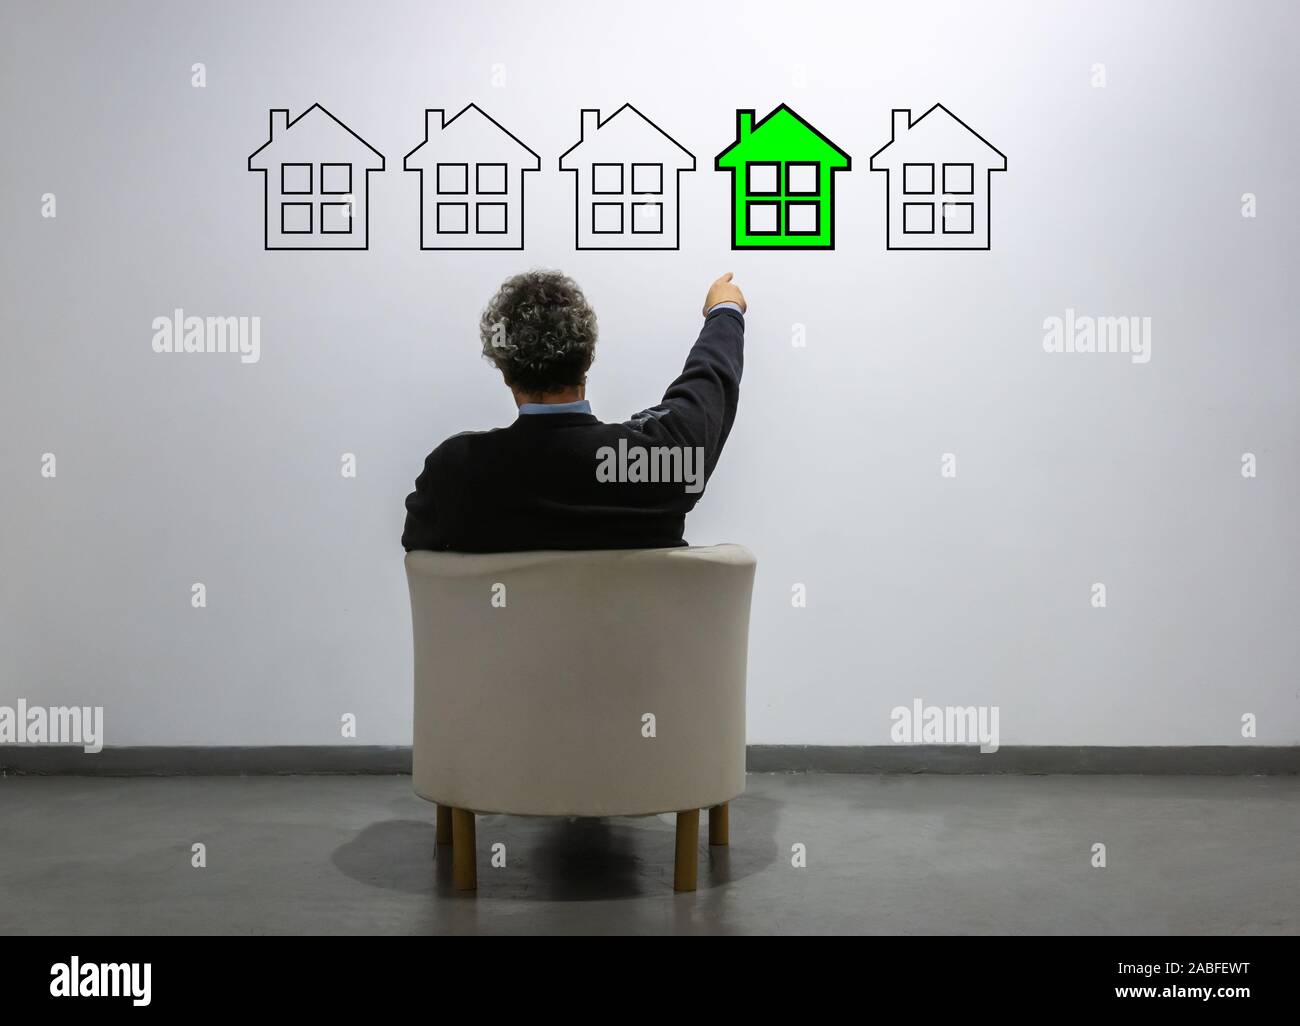 a man in front of a row of house points to a green one. concept of purchase, buying and selling, real estate Stock Photo